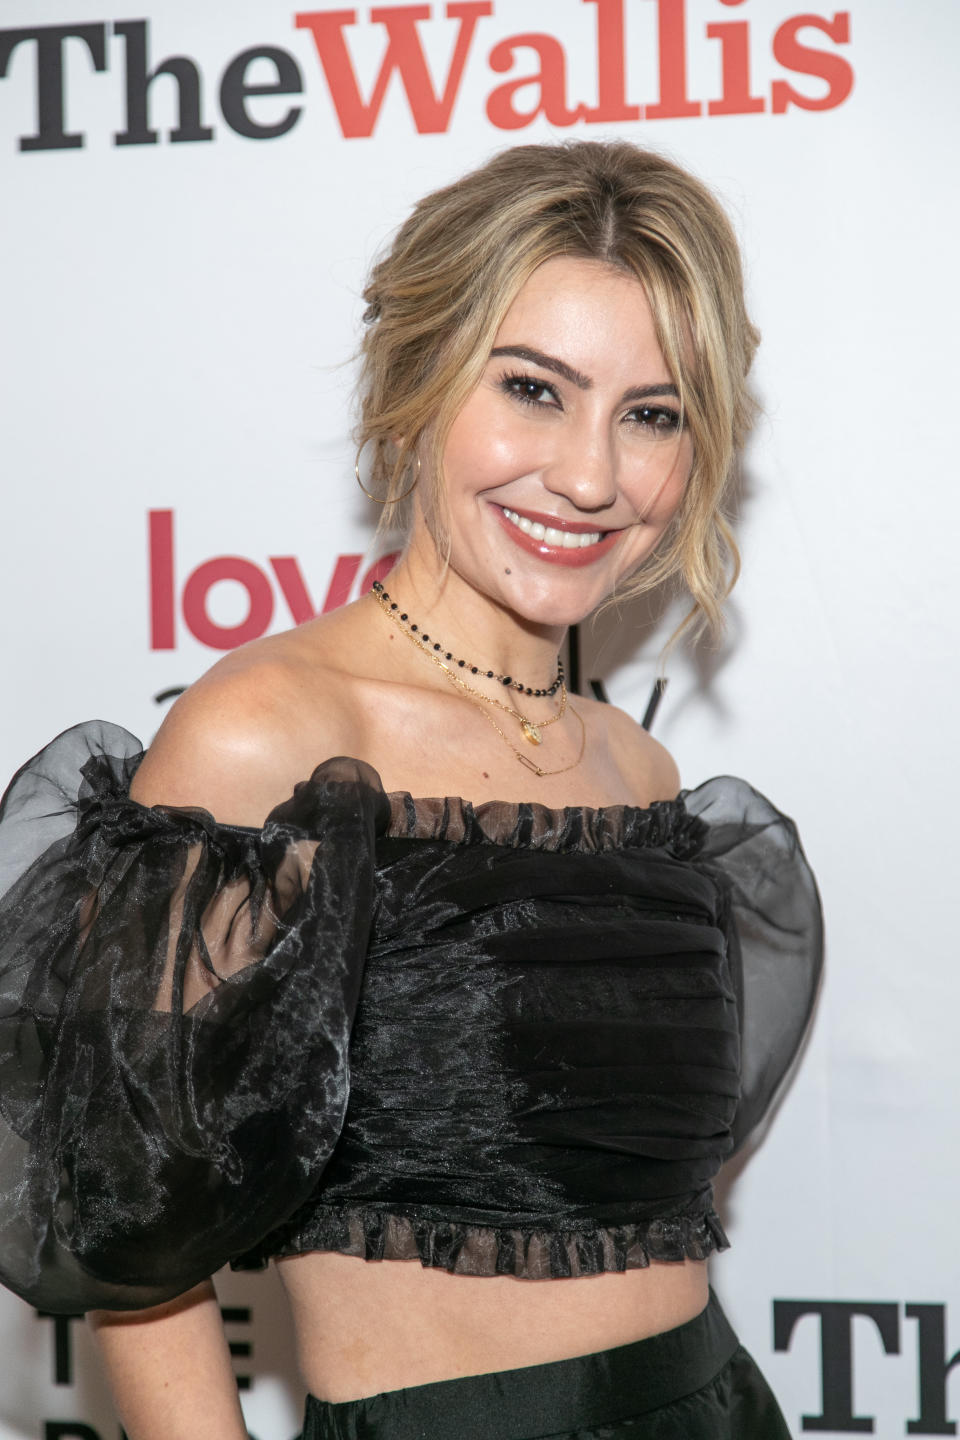 Woman in an off-the-shoulder black top with sheer sleeves at a red carpet event